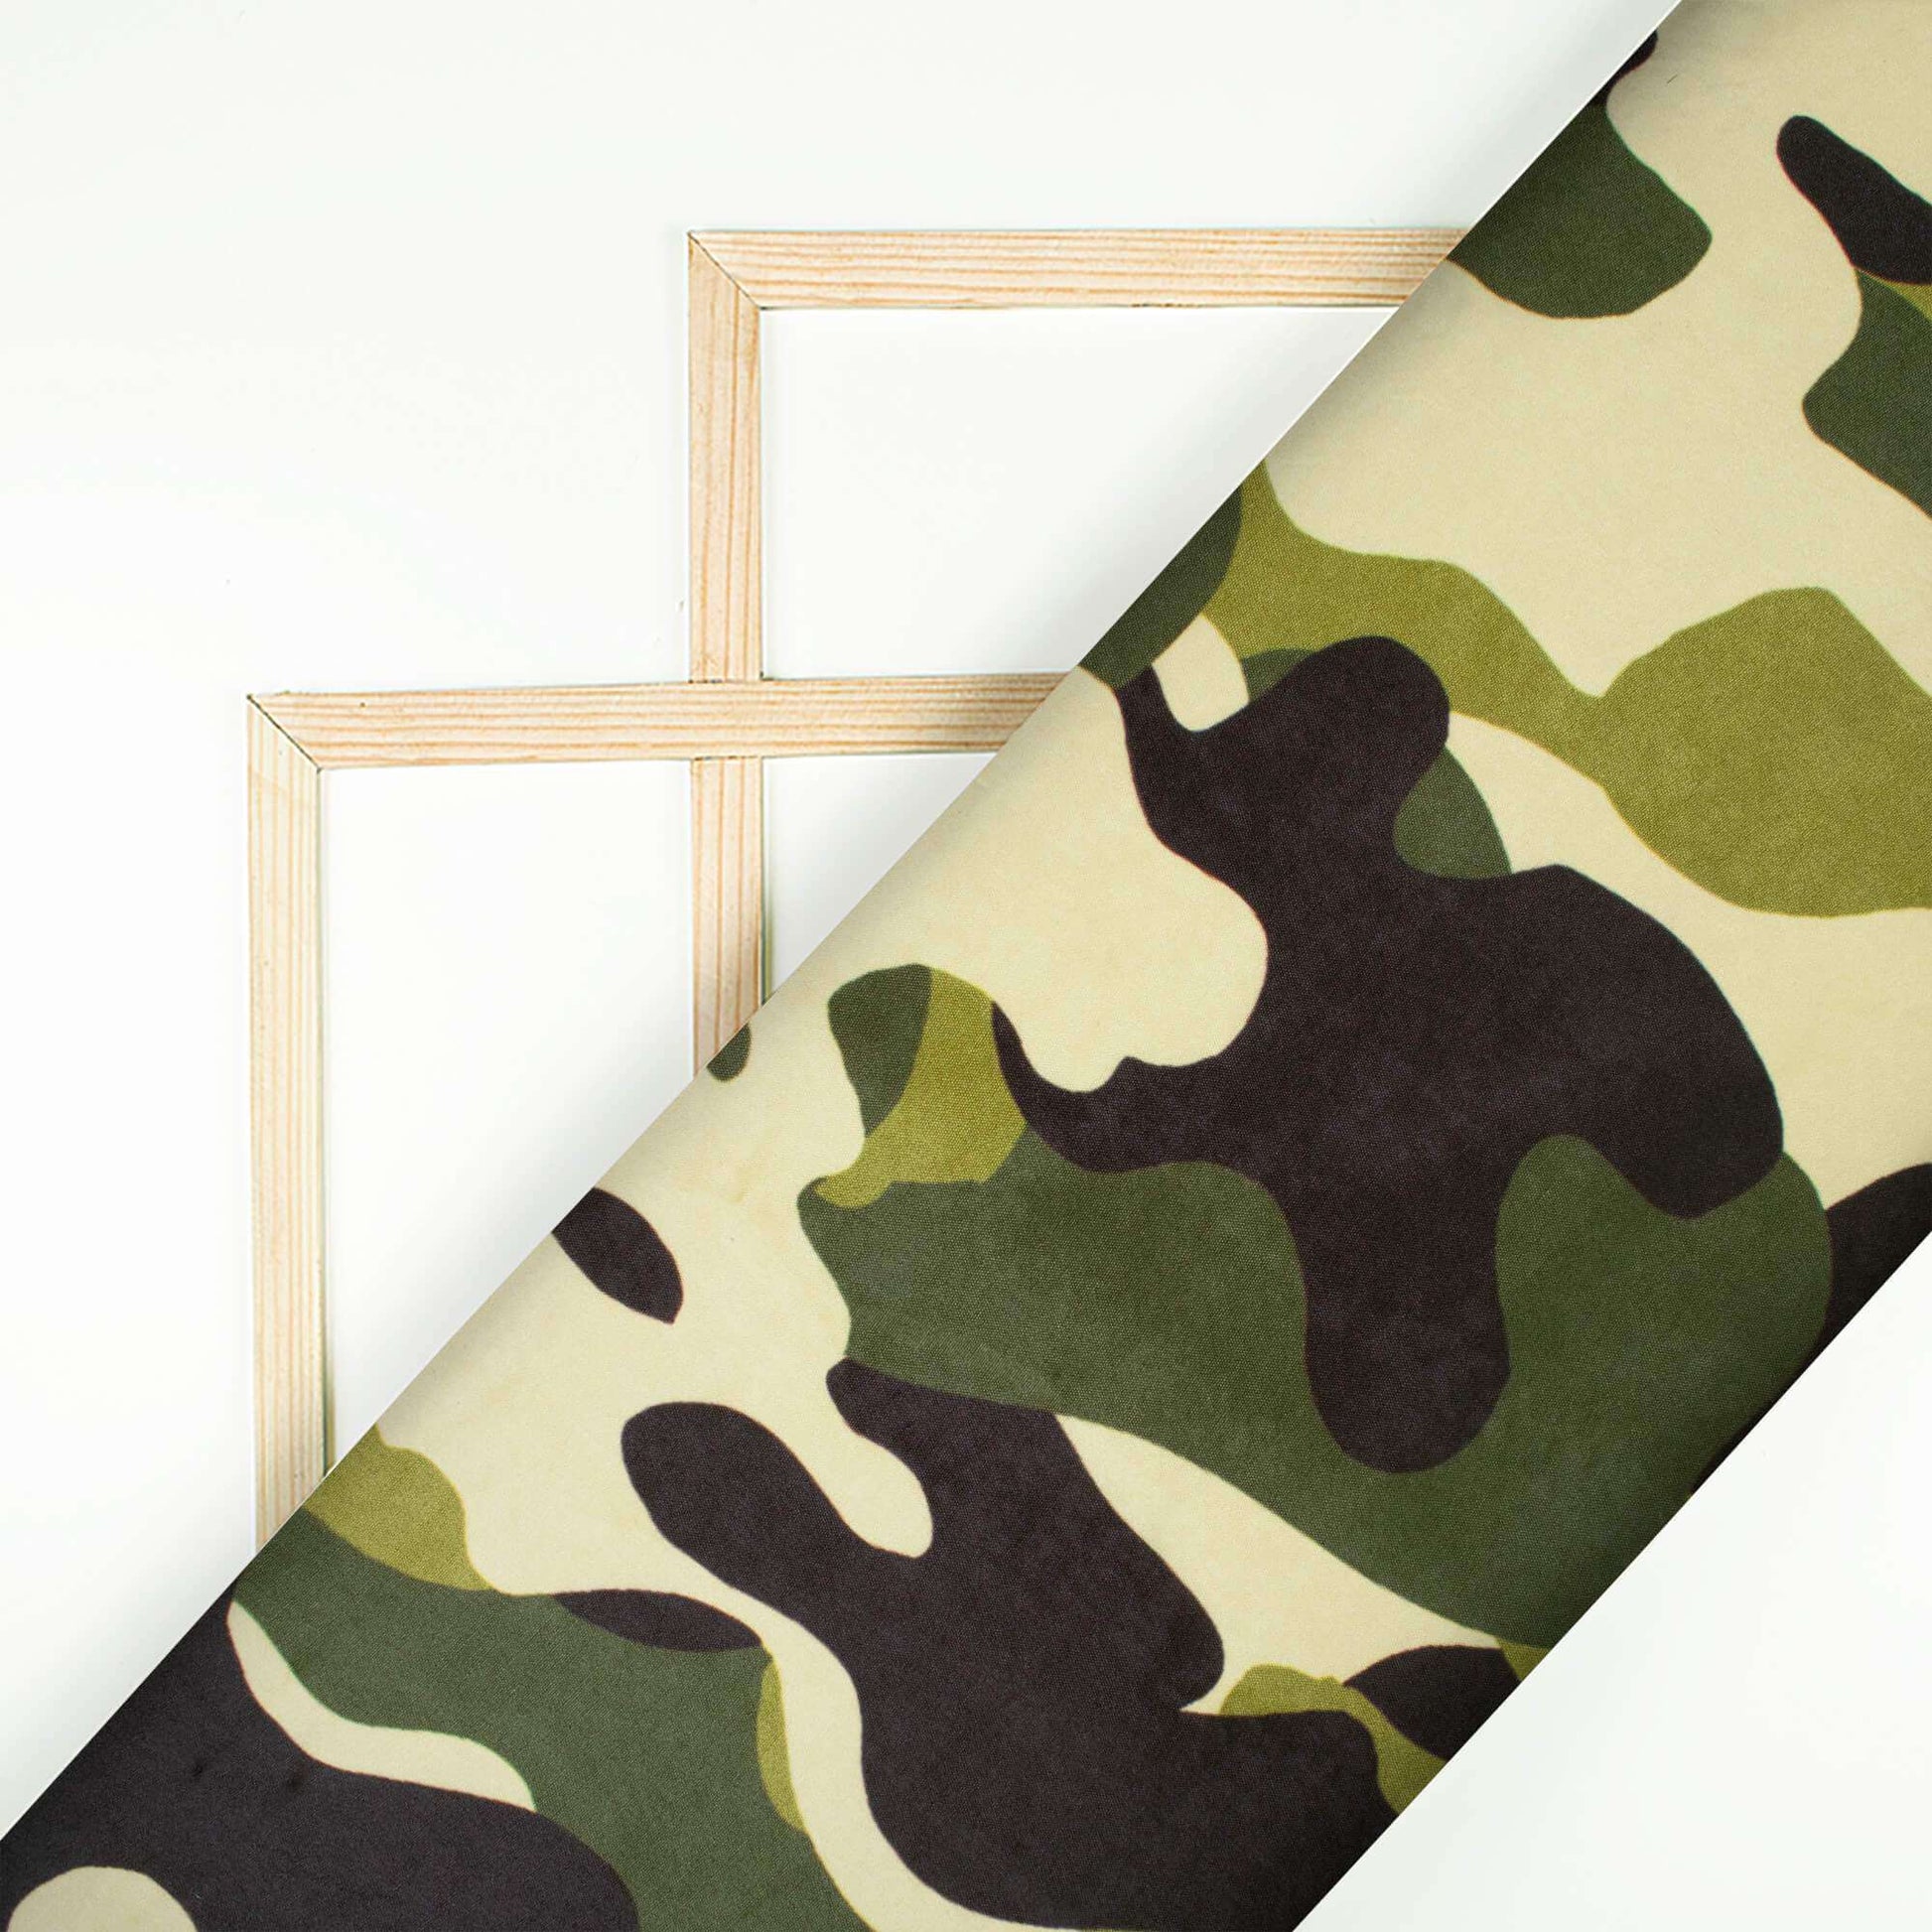 Leopard Print Camo Designs, Camouflage colors - military green Poster for  Sale by miyagifactory